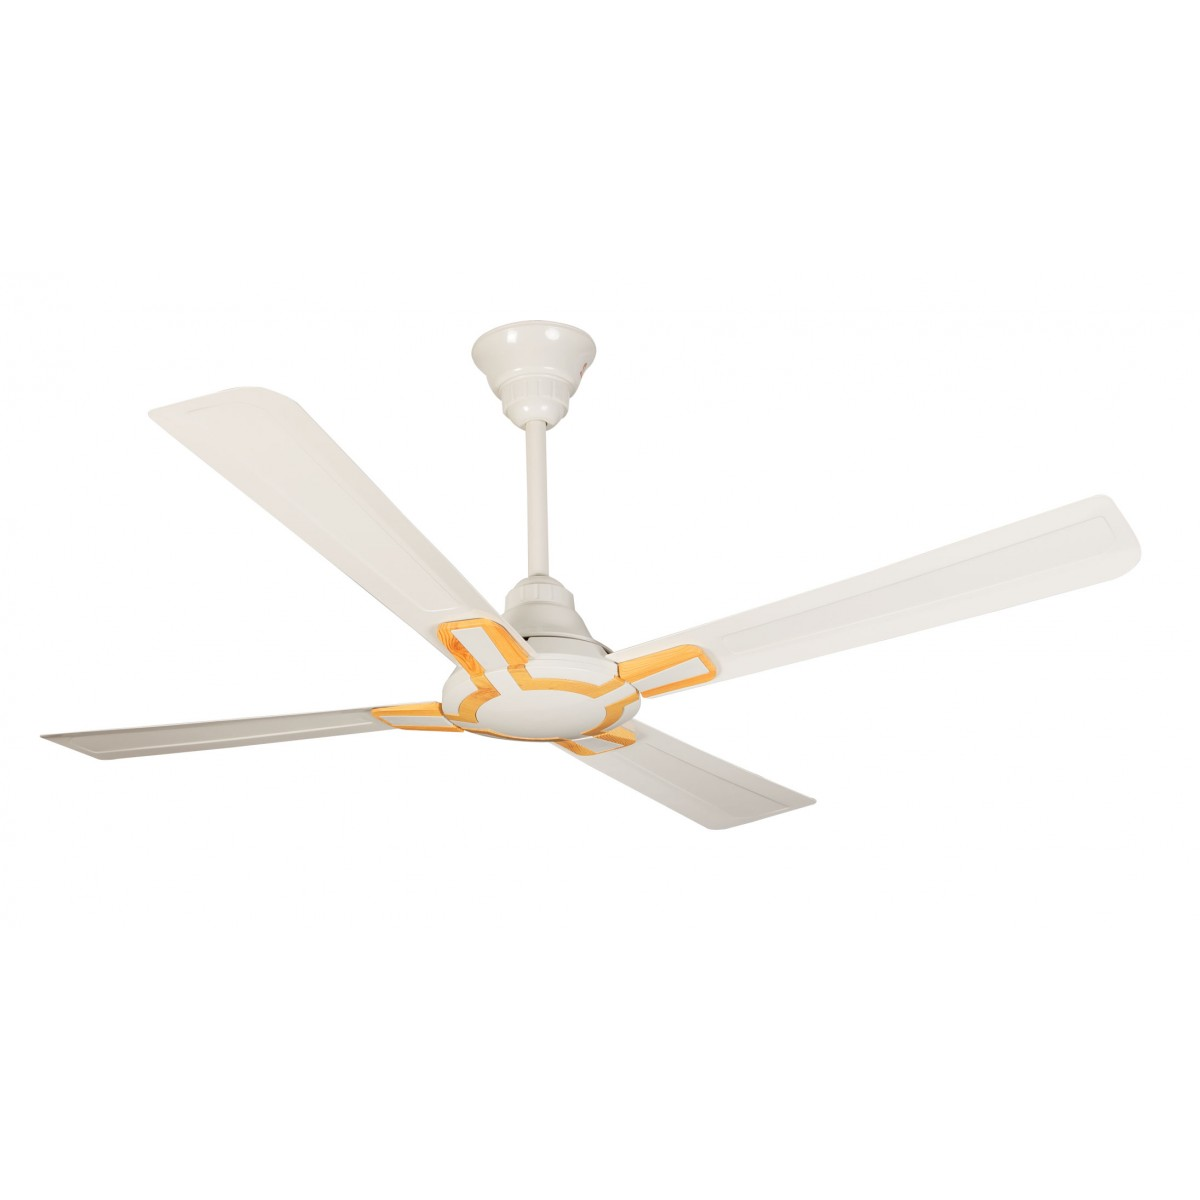 GFC Ceiling Fan Delta Model 56 - Copper Winding High quality paint for superior finishing. Brand Warranty